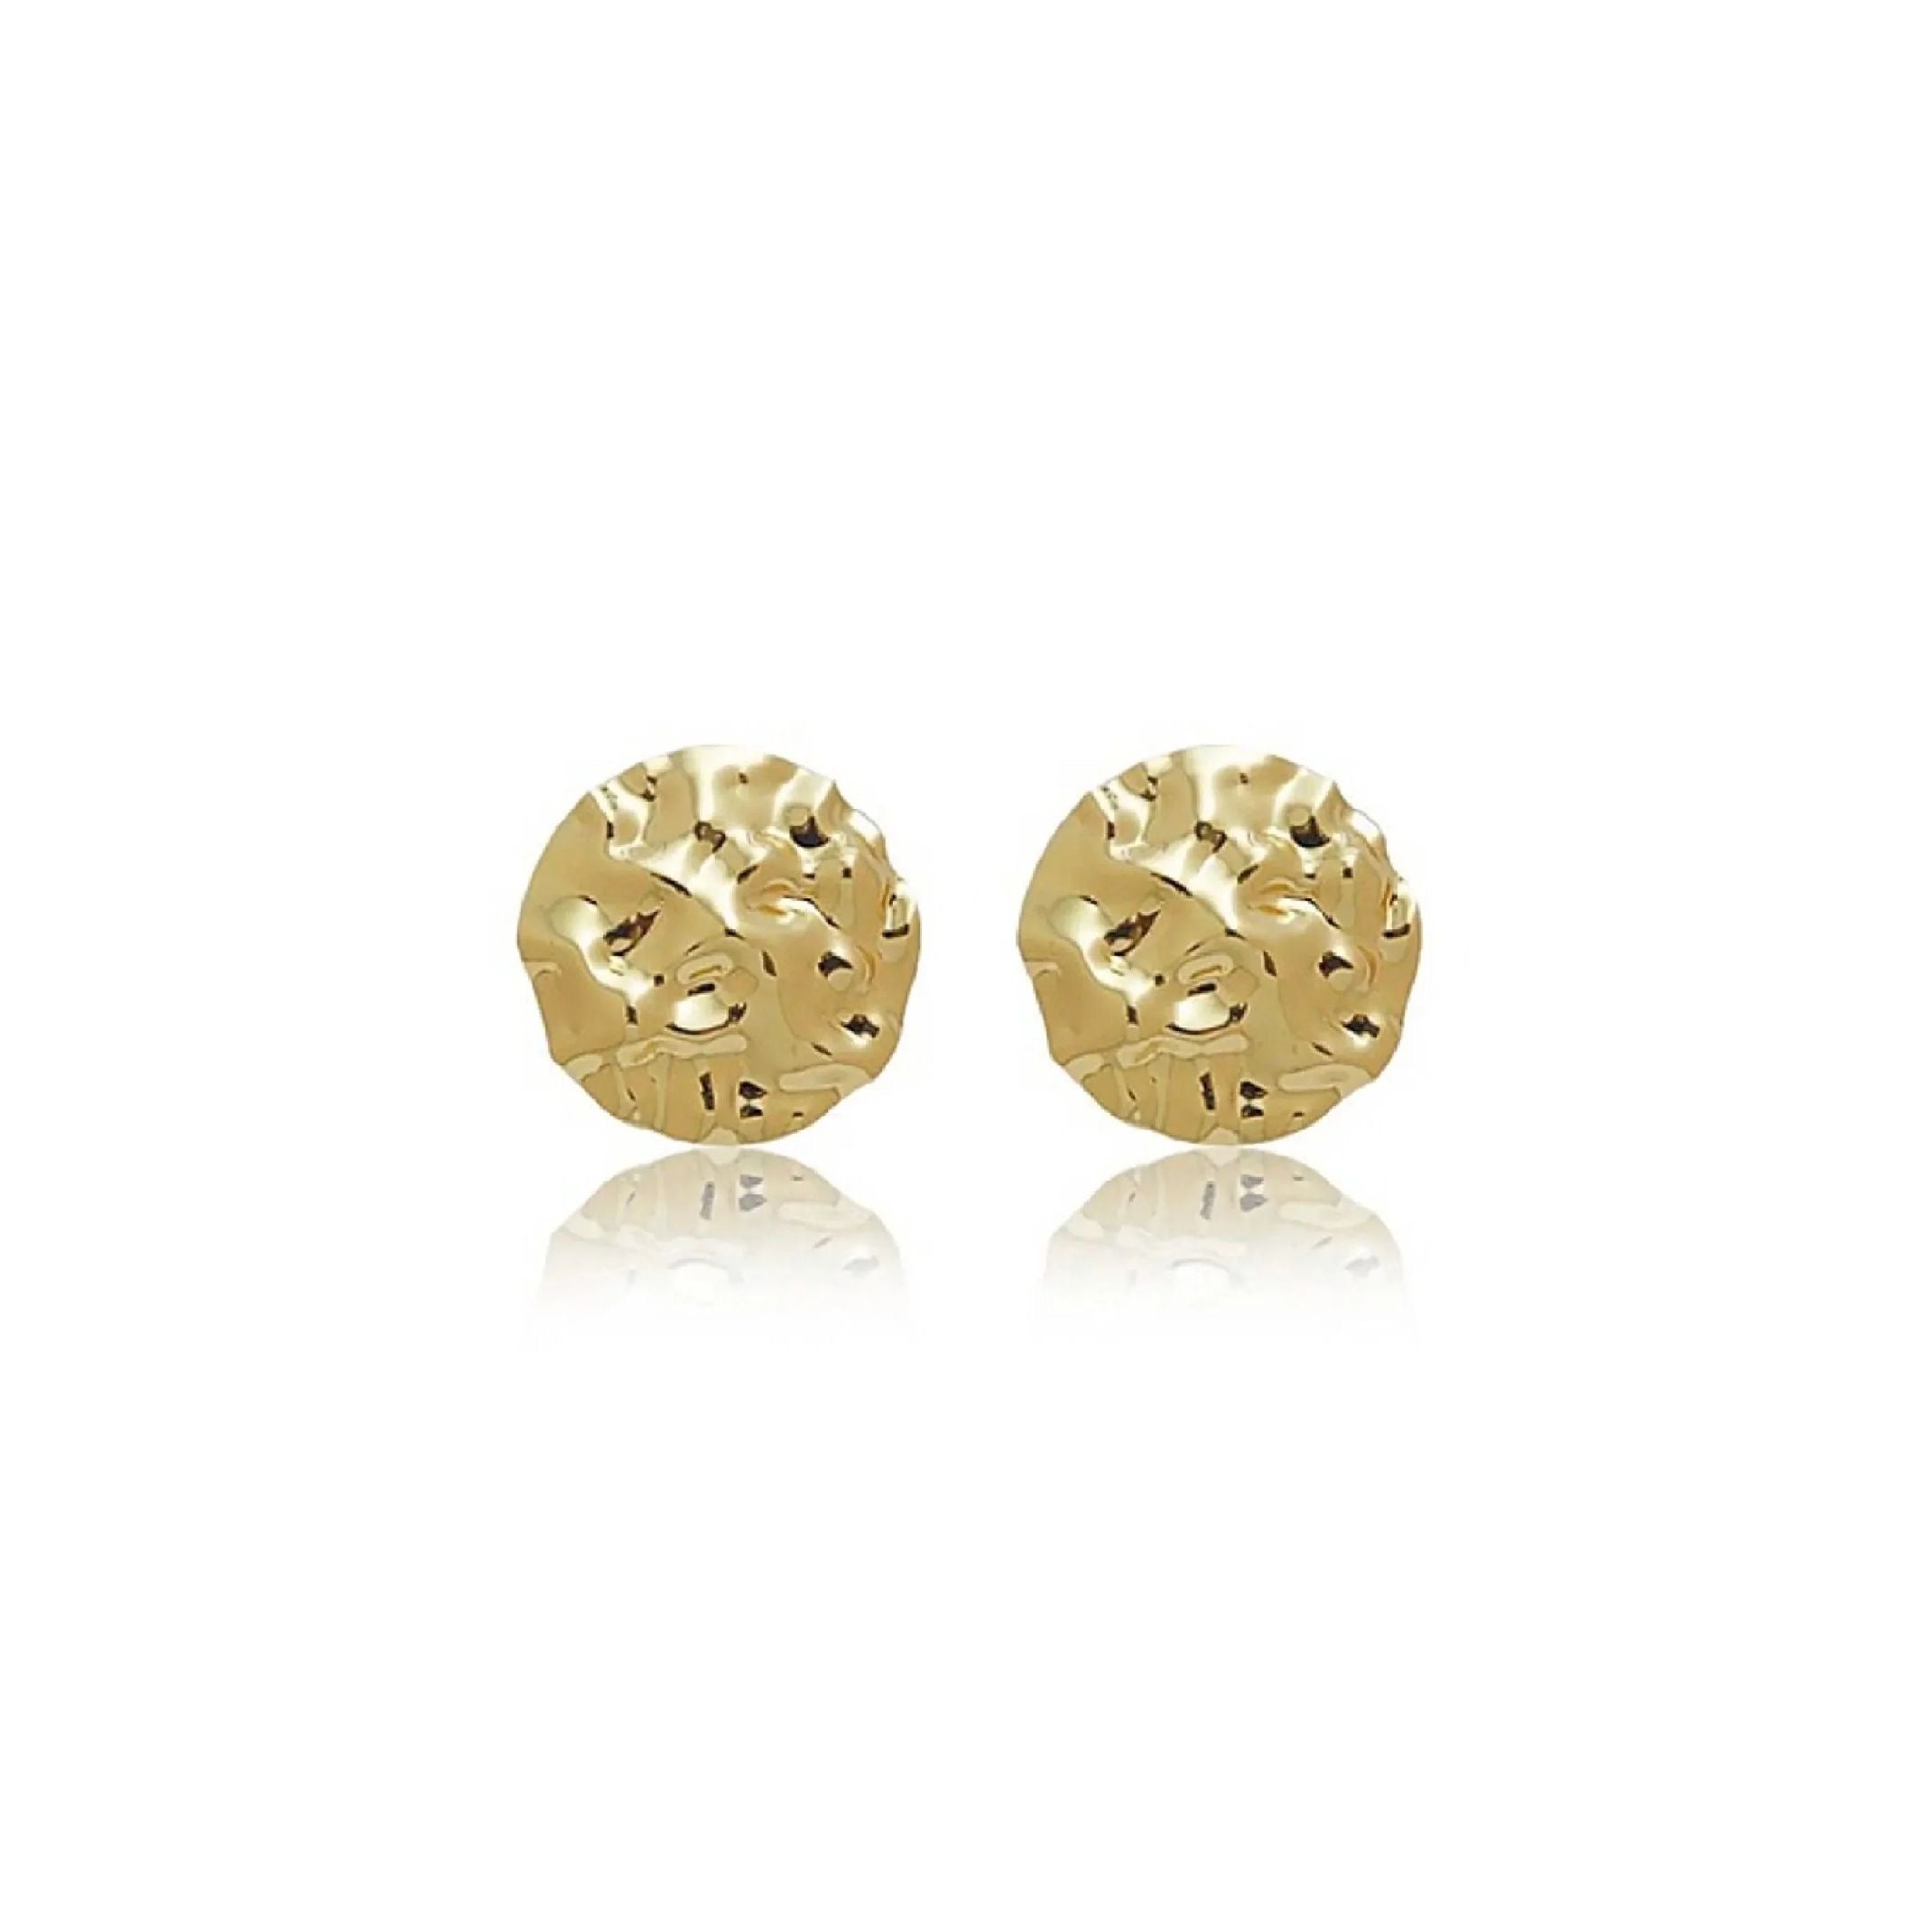 Gold textured stud earrings 